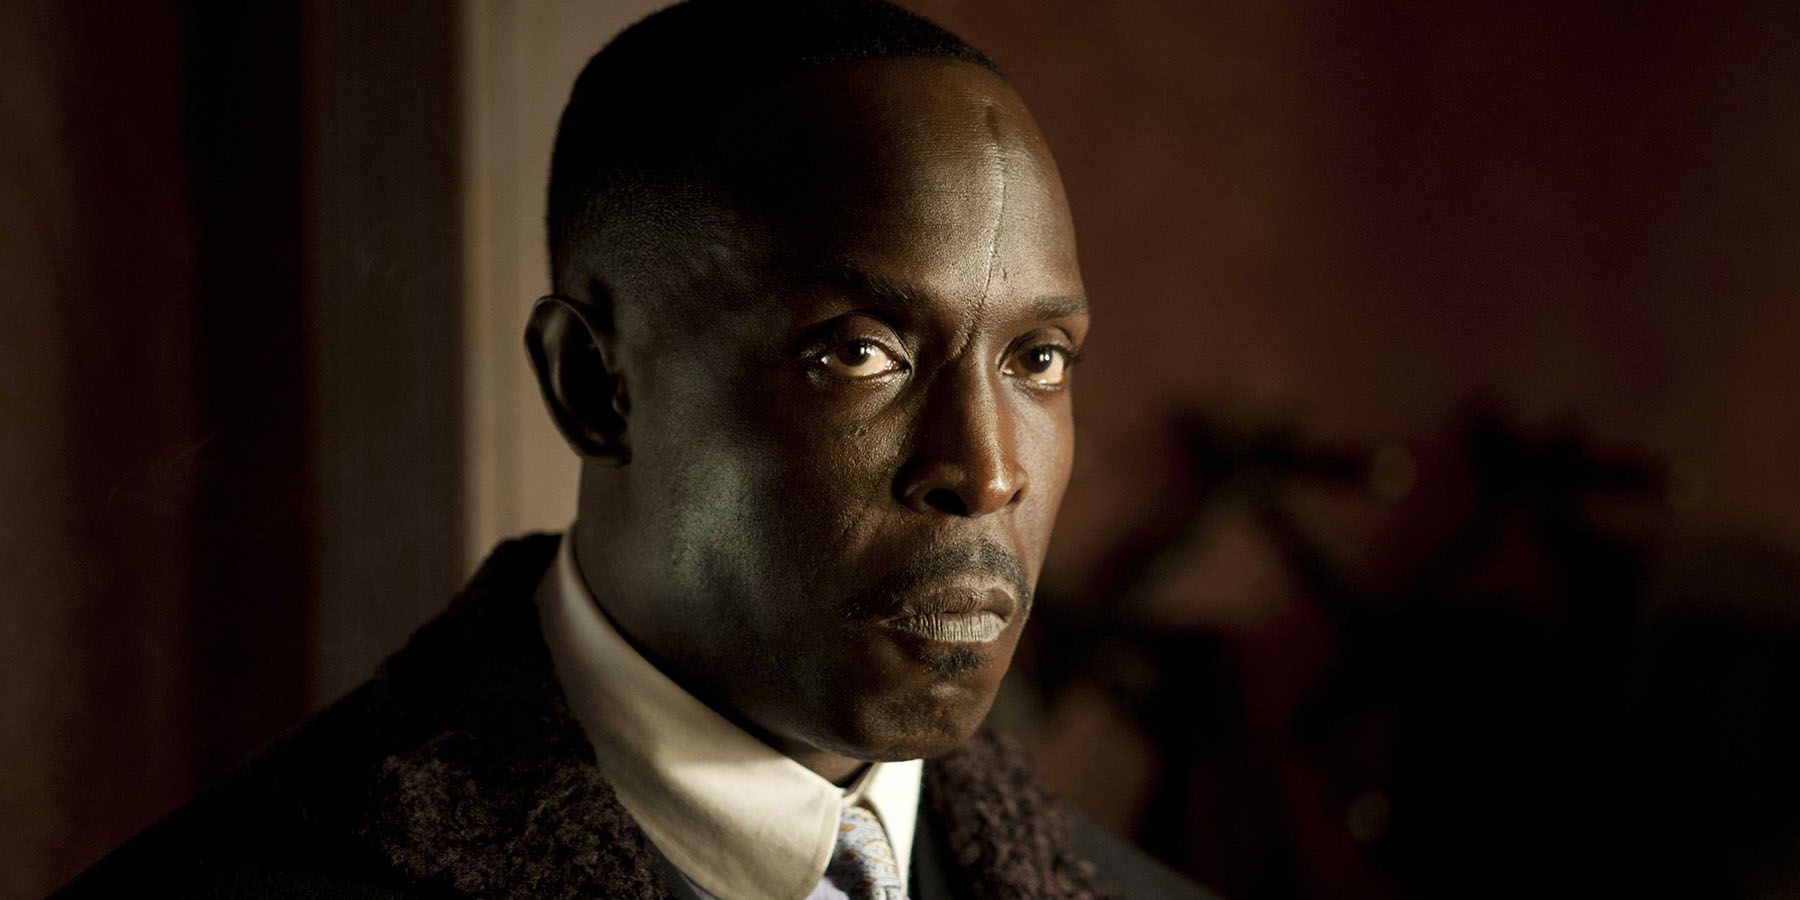 Michael K. Williams stares ahead during a scene